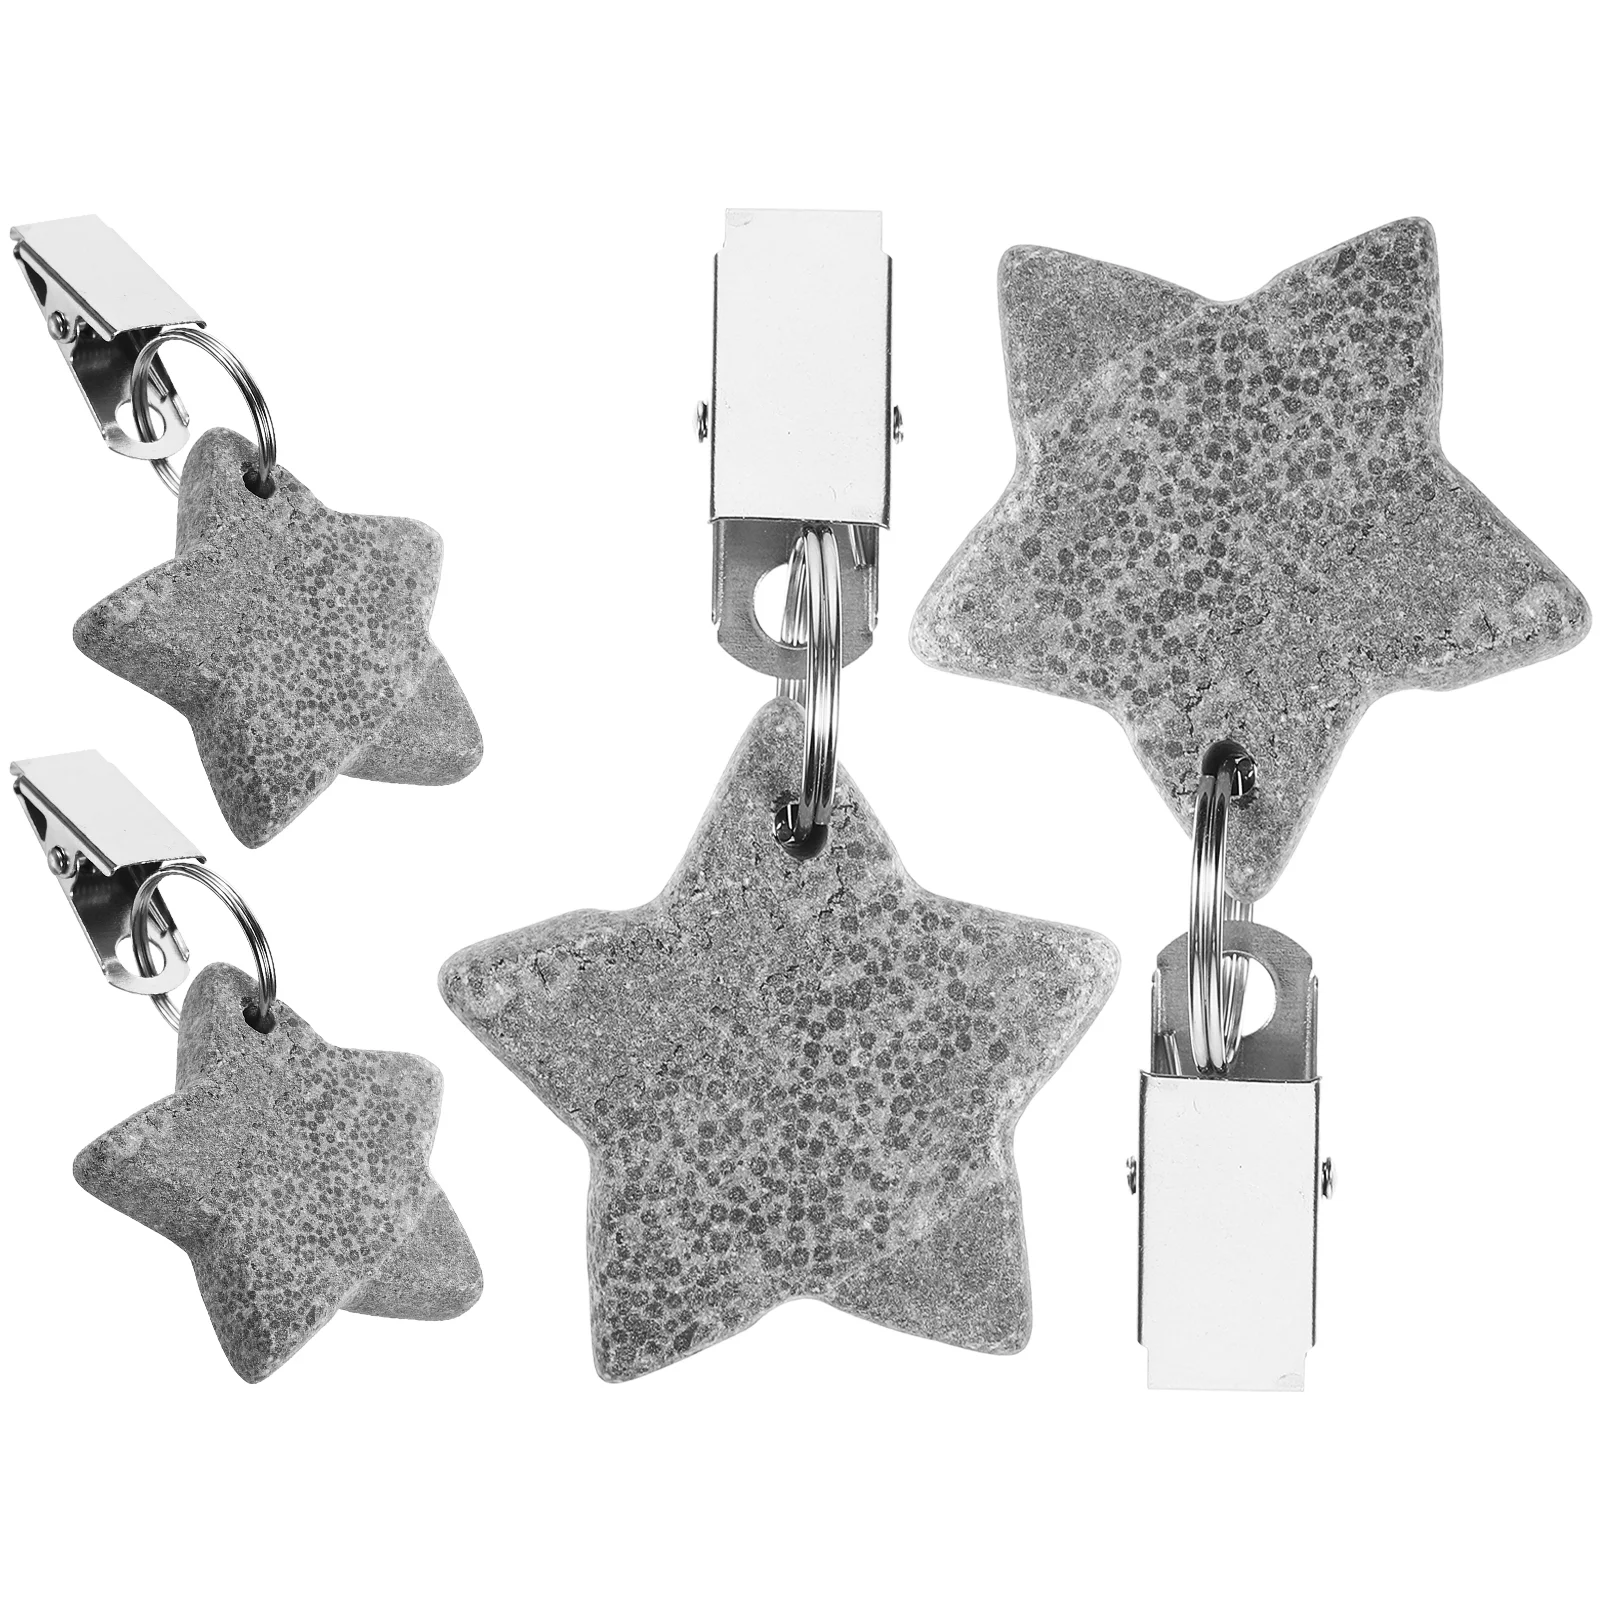 

Tablecloth Clips Star Shaped Tablecloth Weights Tablecloth Pendants Weights With Clip For Picnic Wedding Party 4x4cm